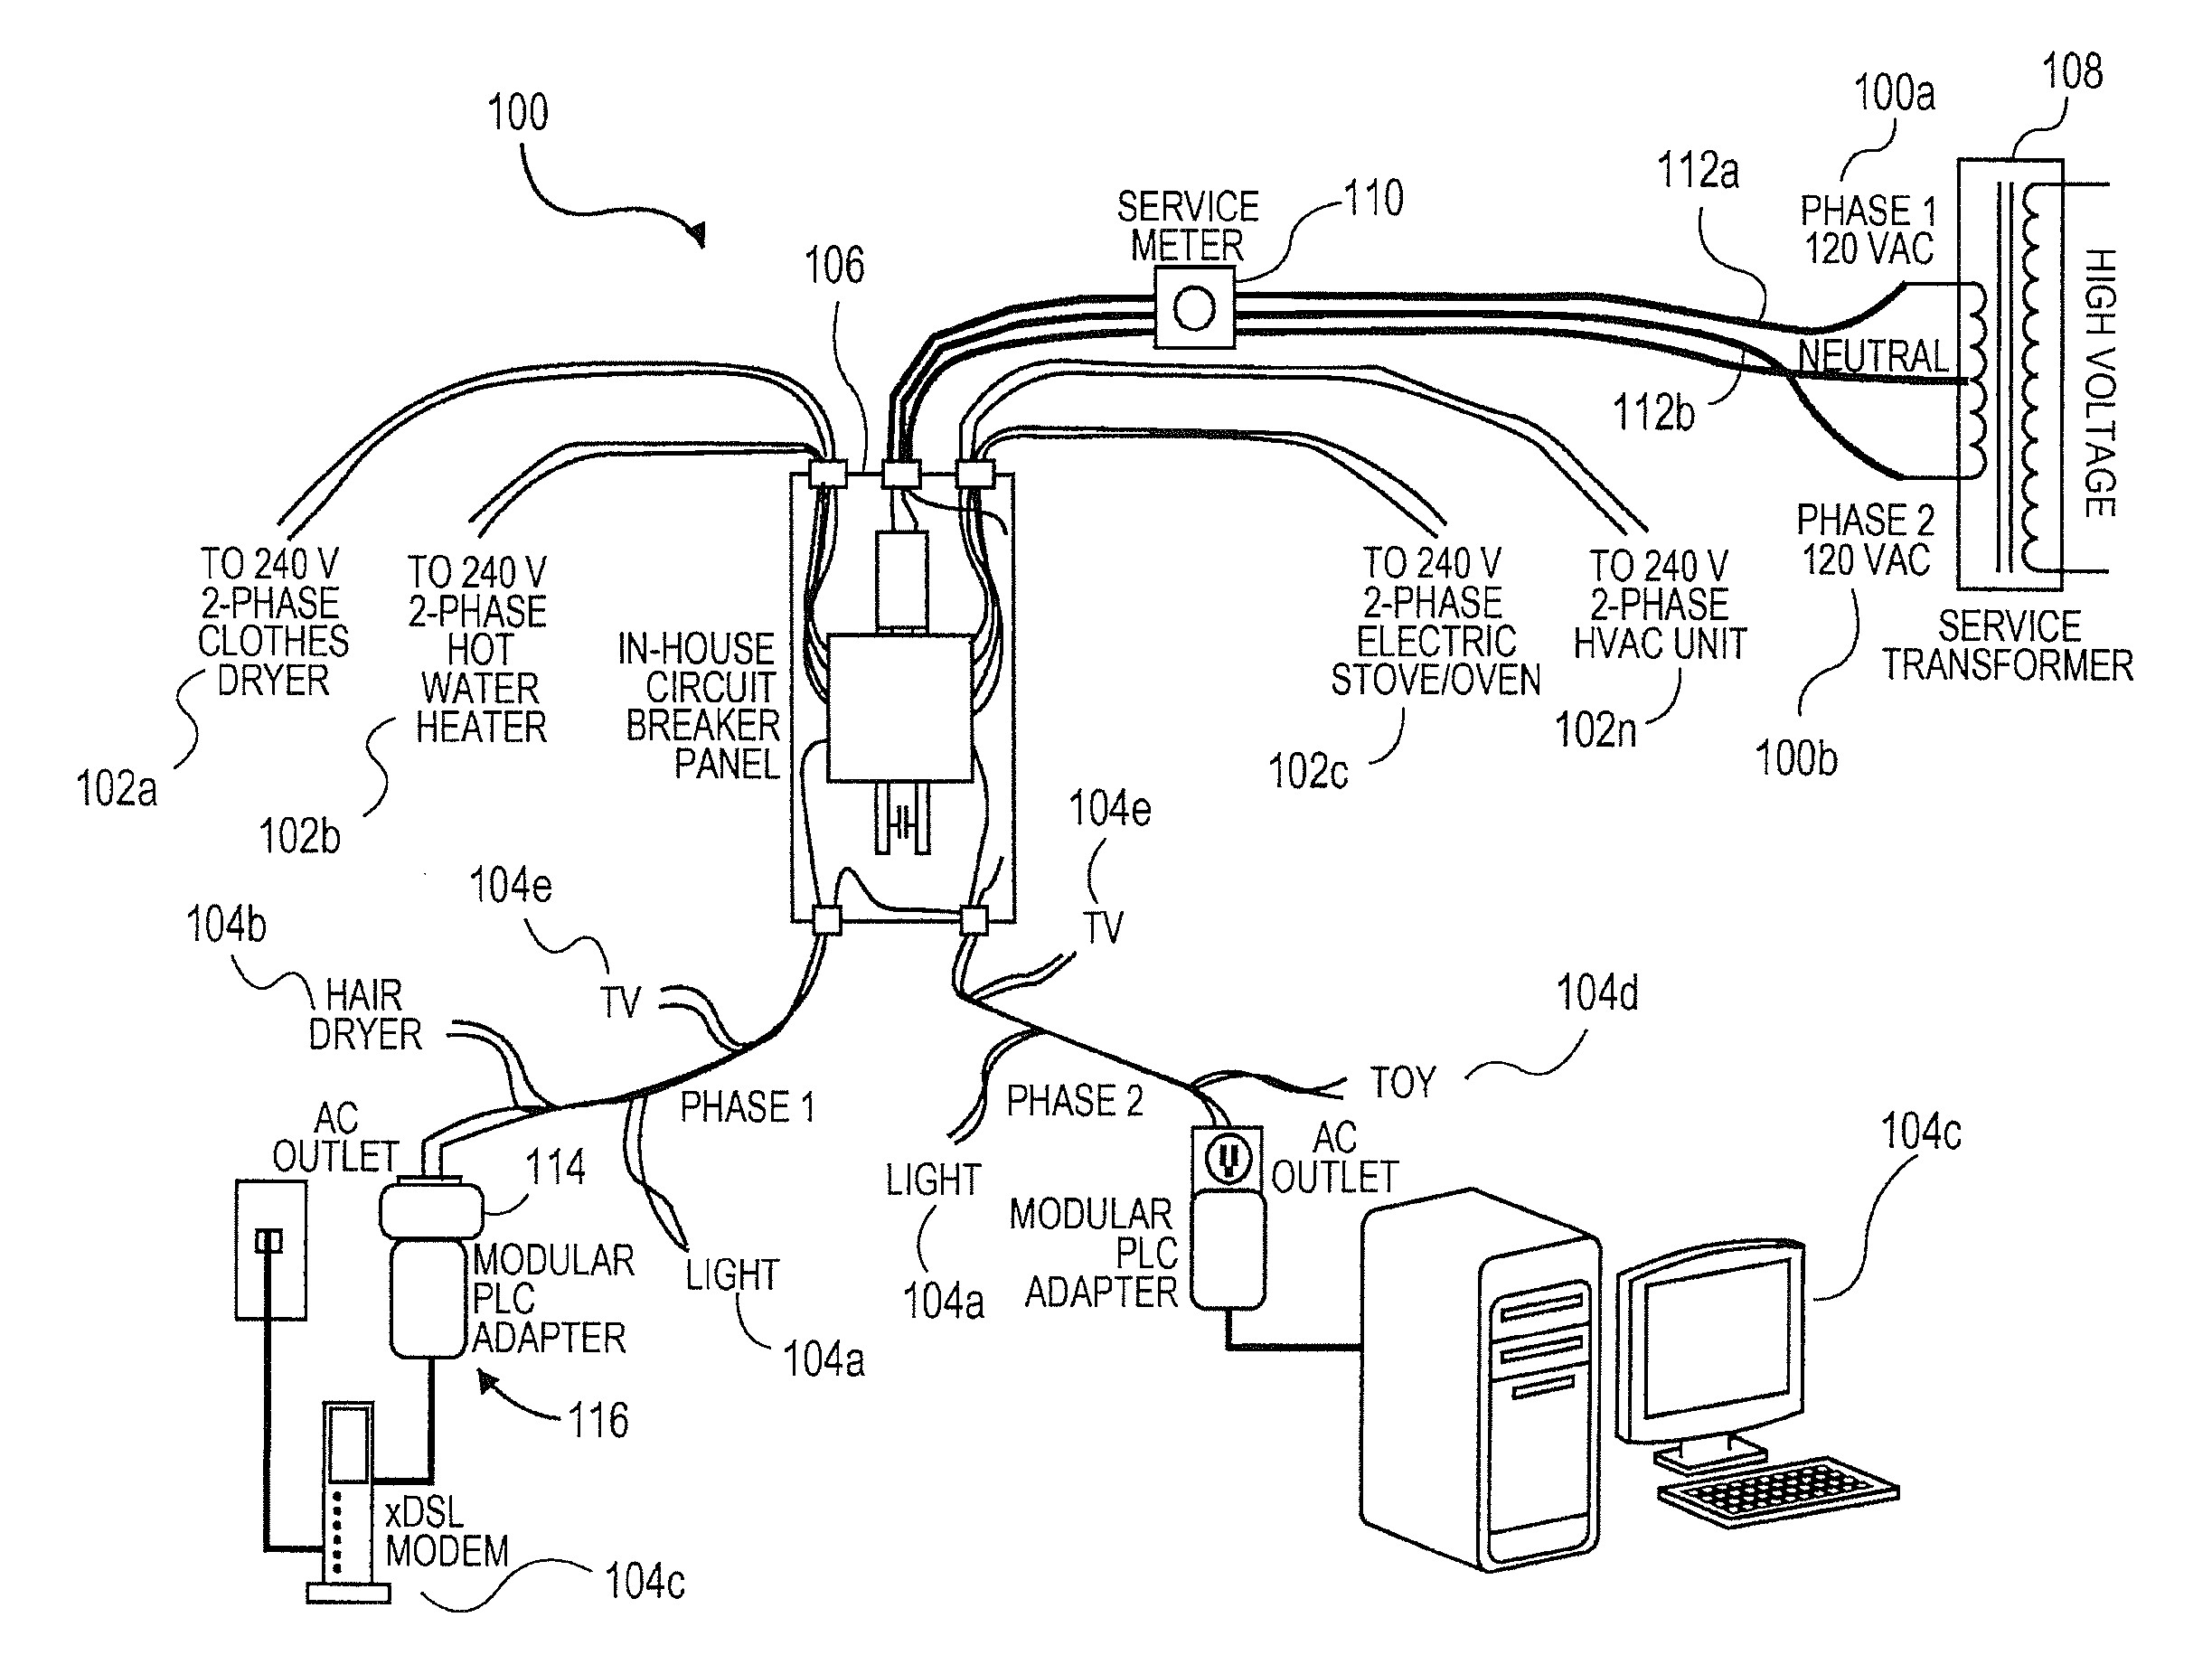 System and method to measure and control power consumption in a residential or commercial building via a wall socket to ensure optimum energy usage therein